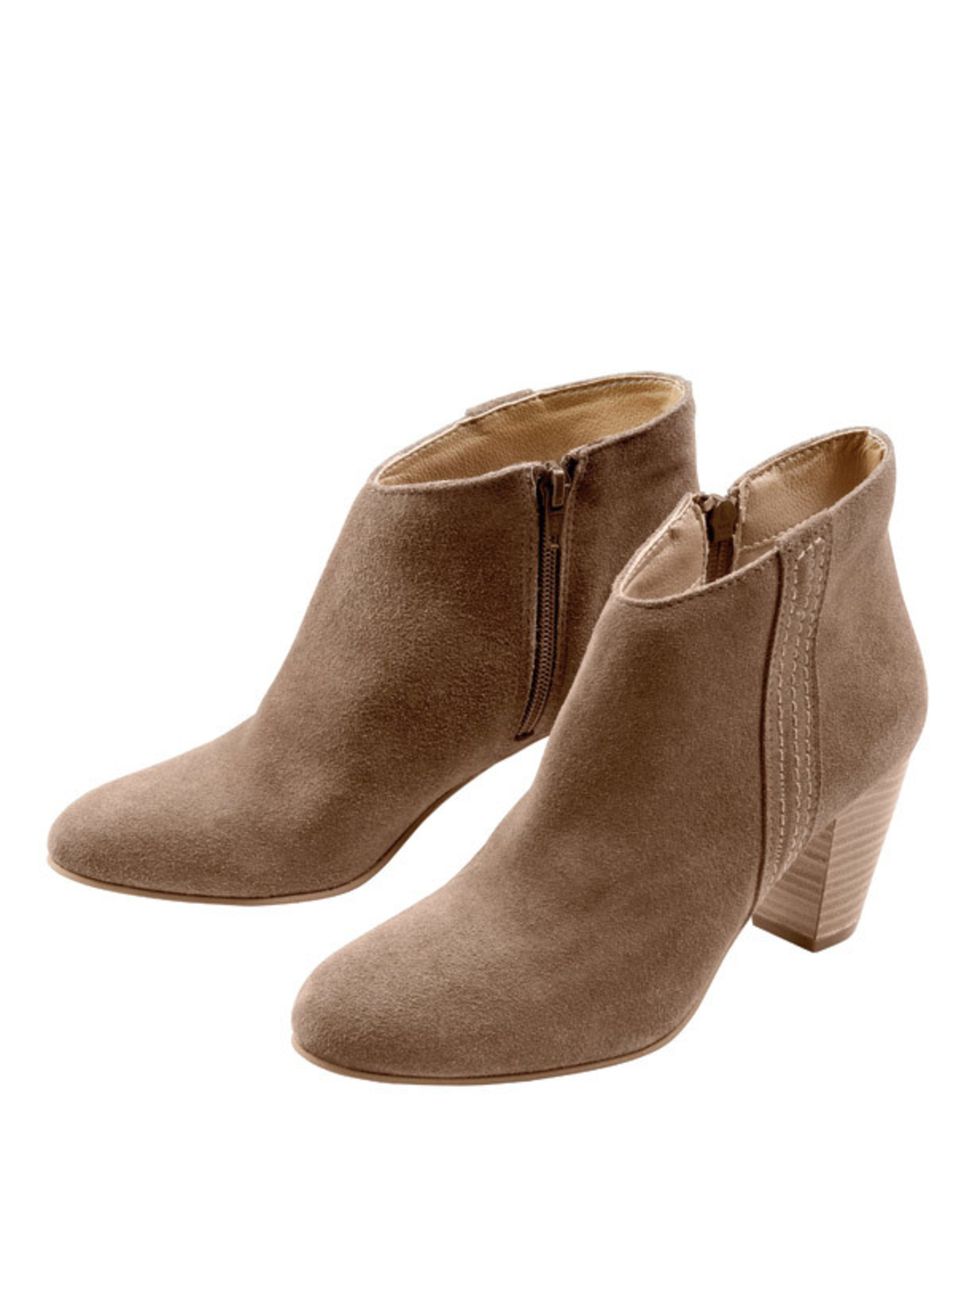 <p>Suede ankle boots, £79, by <a href="http://www.laredoute.co.uk/clothing/Shoes.aspx?CategoryId=61035209&amp;Path=61026618/61035209&amp;ChmCatId=61035209">La Redoute</a> </p>